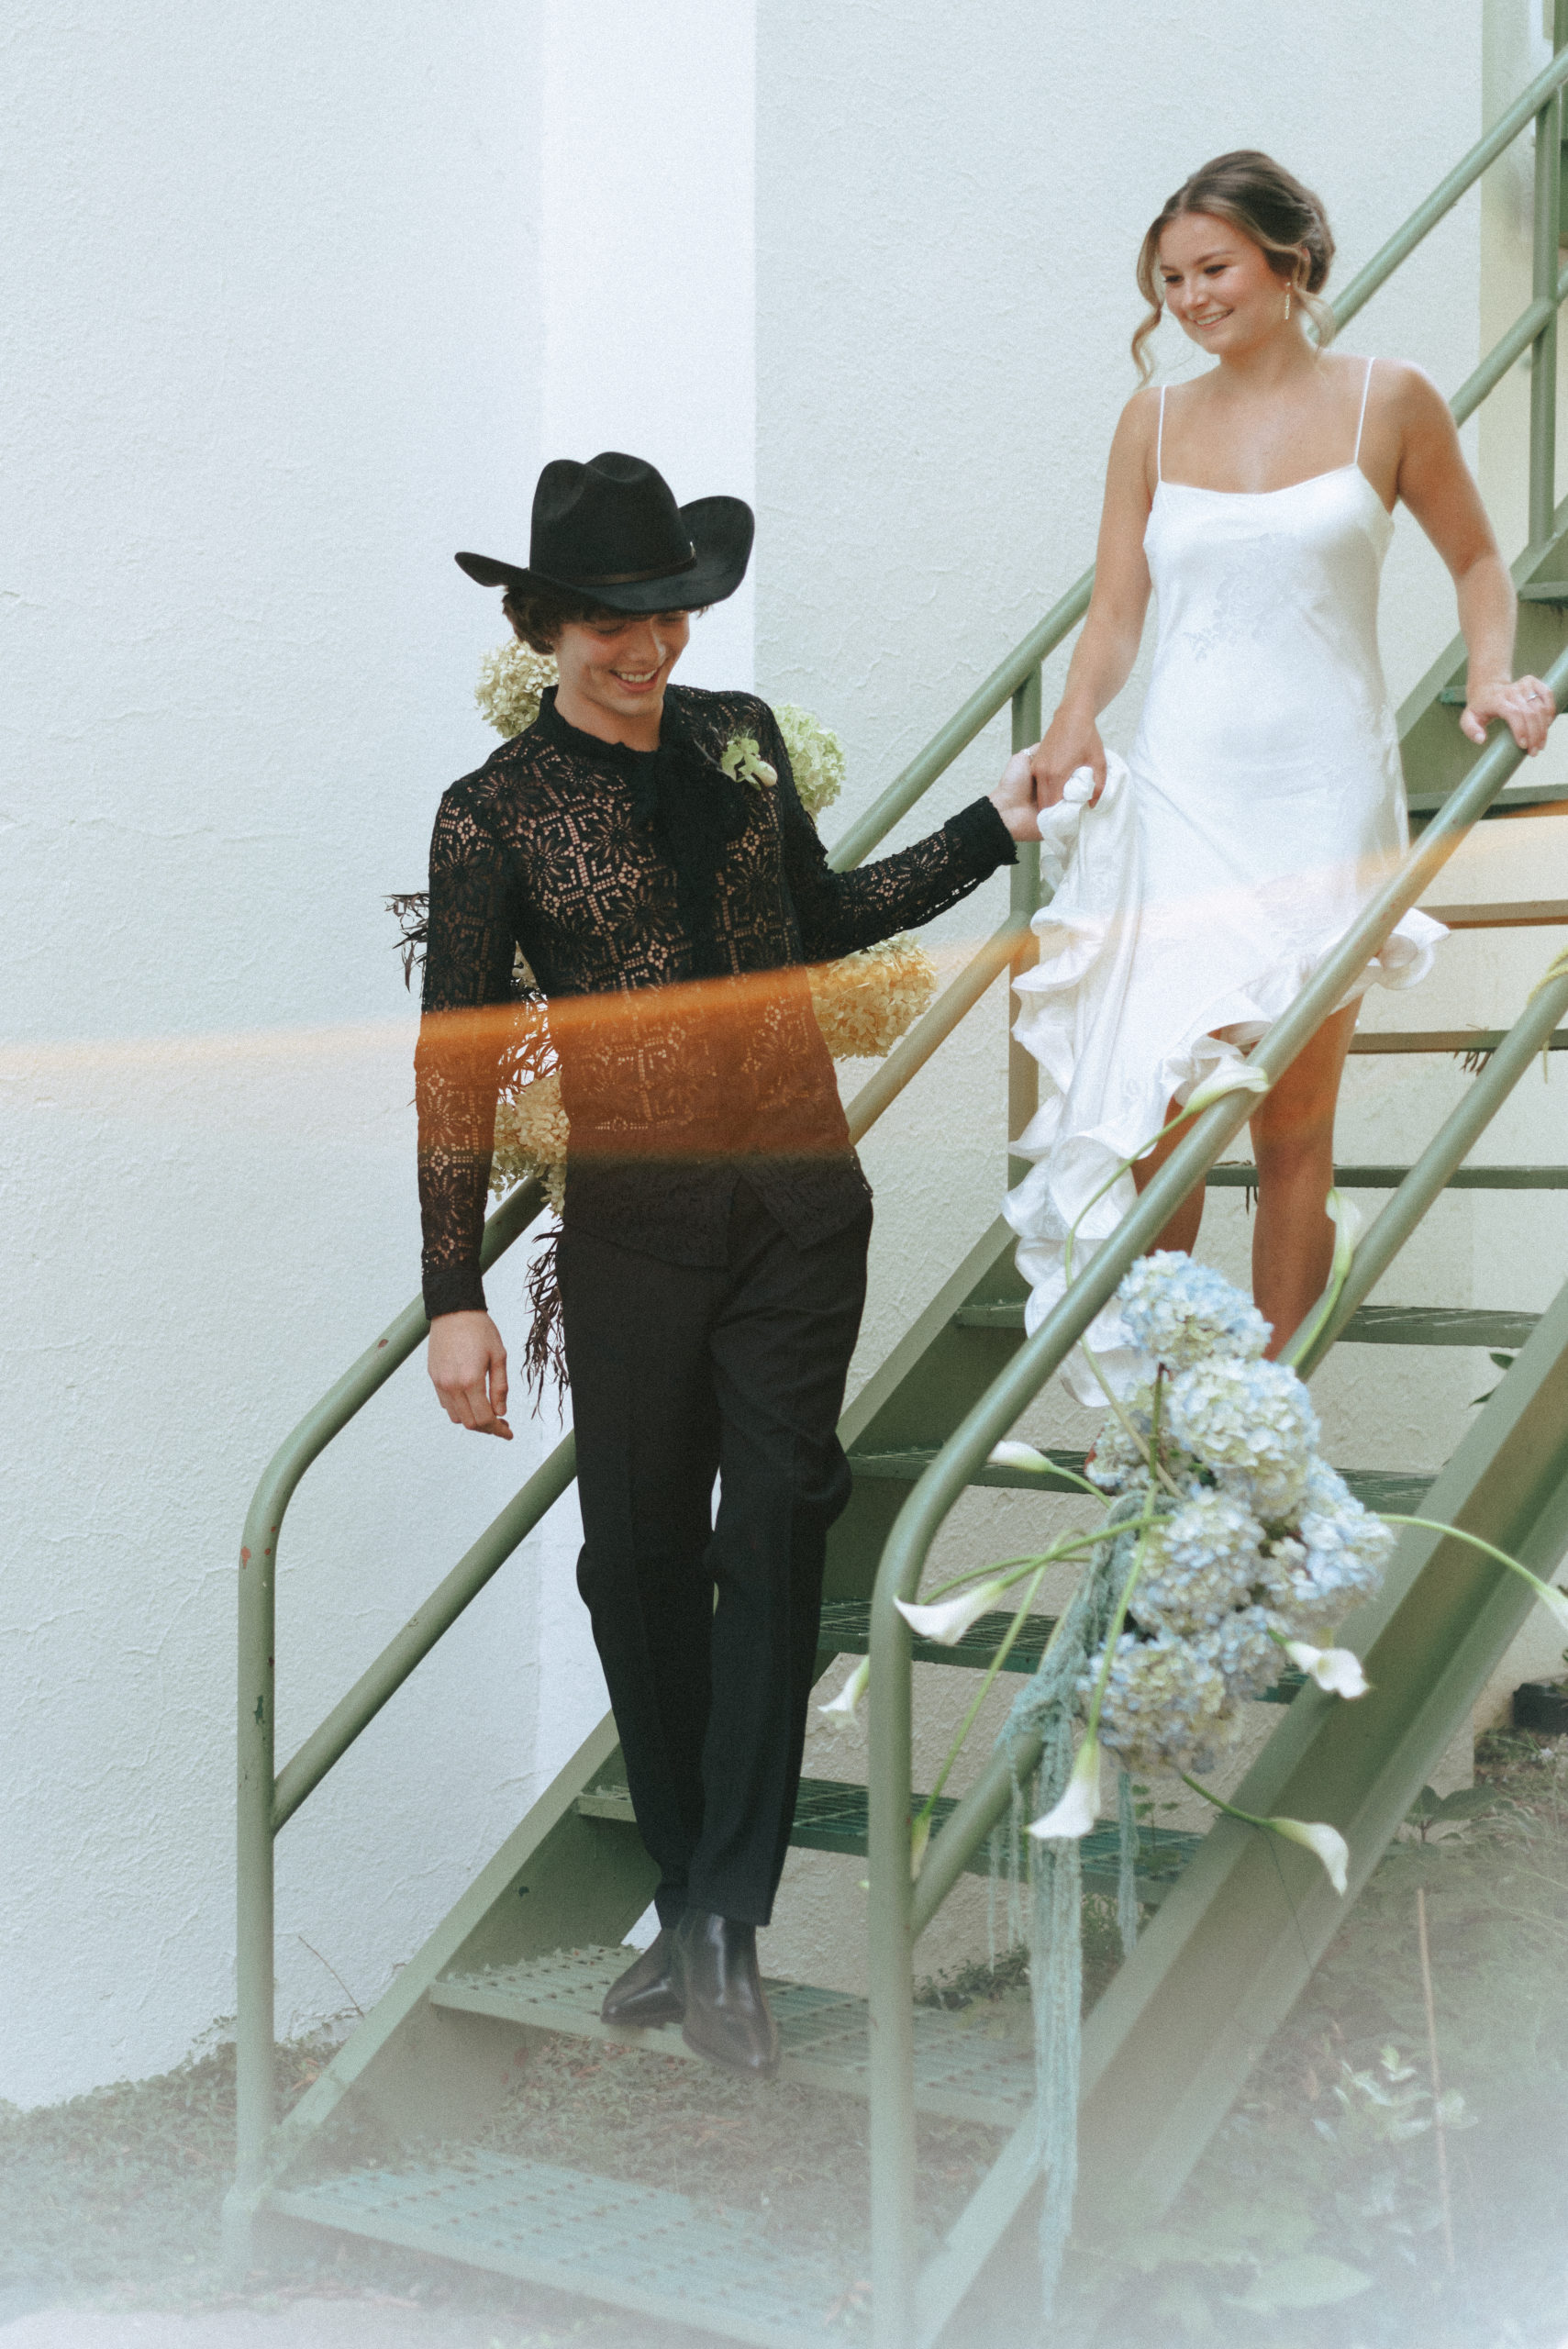 Gorgeous and young couple takes their vows to a new unique setting and decides to wed on a stairwell! We love it!